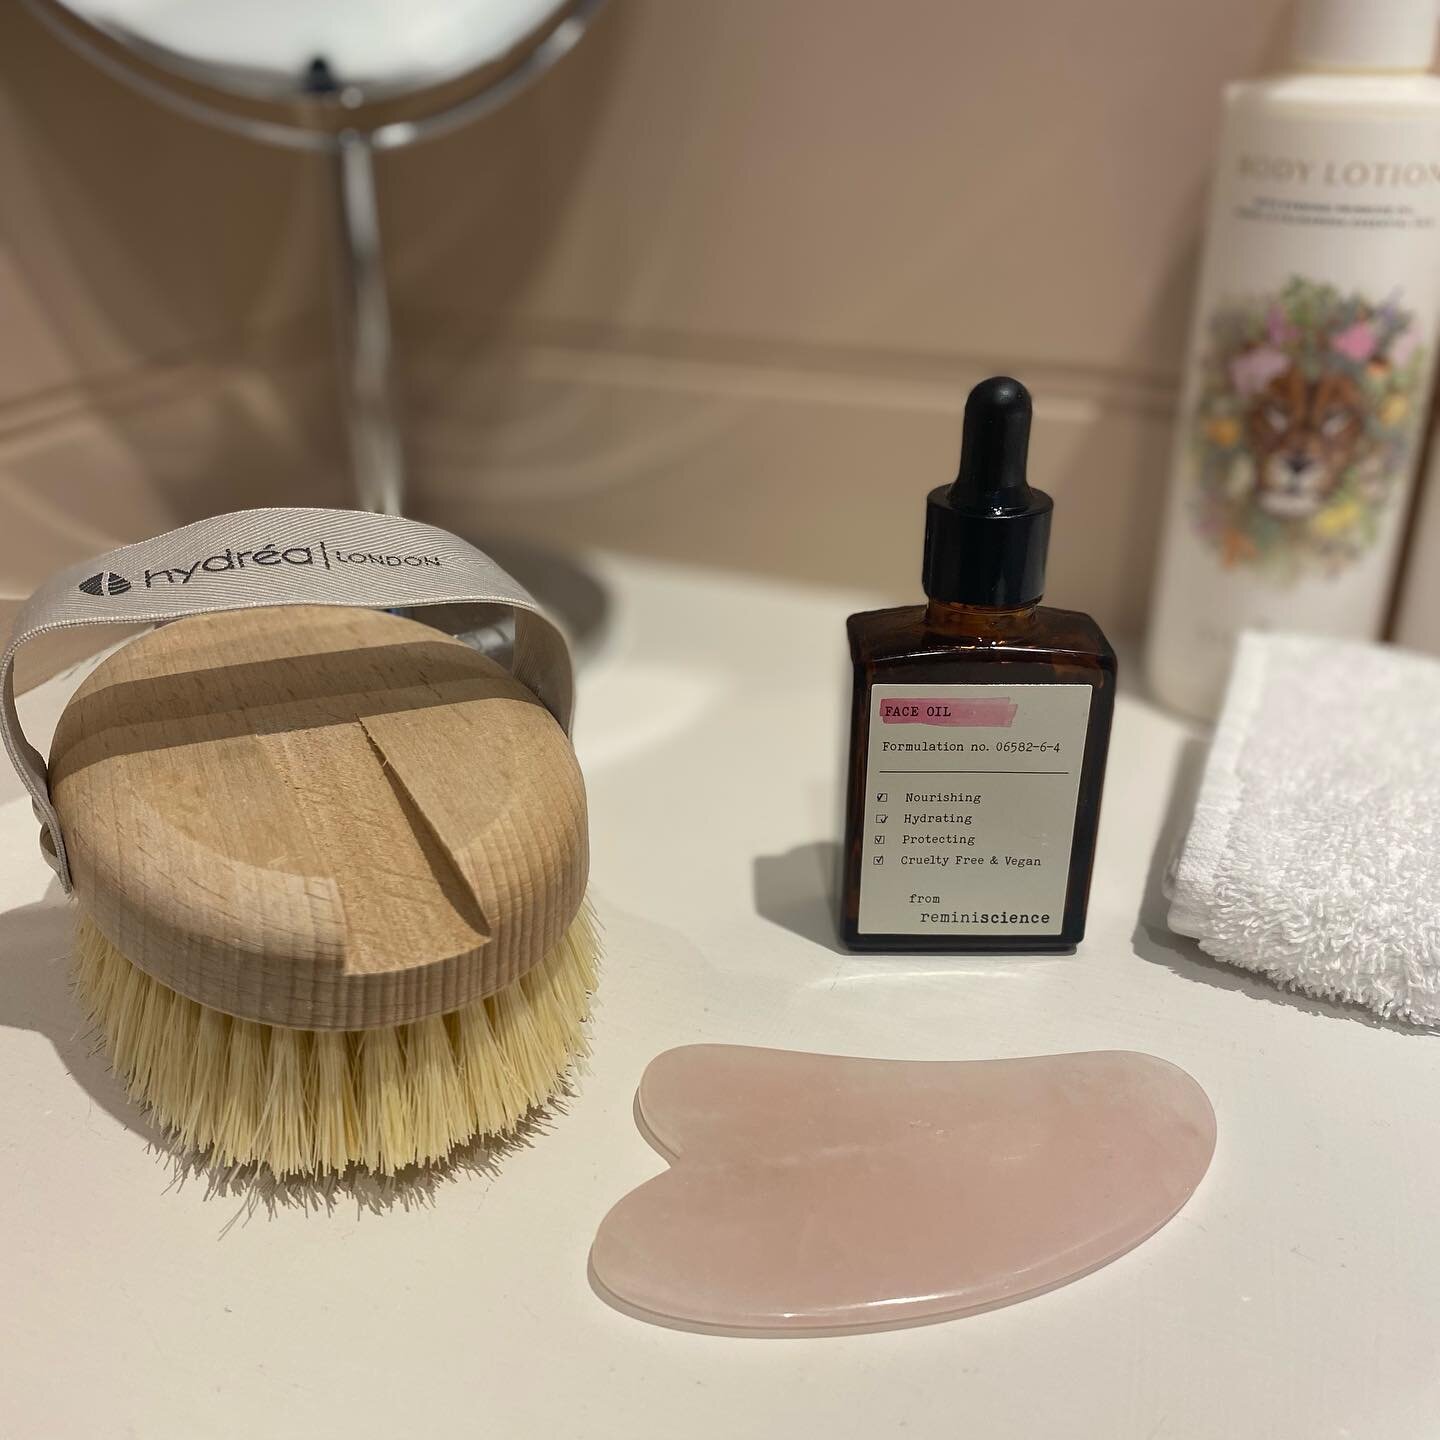 What I have within reach Part.1 😁
✨ Body Brush
✨ Oil 
✨ Rose Quartz Gua Sha
💖 
Body brushing through the winter and into the spring is what keeps the body stimulated and flowing - so there&rsquo;s no place for stagnancy to build and therefore minim